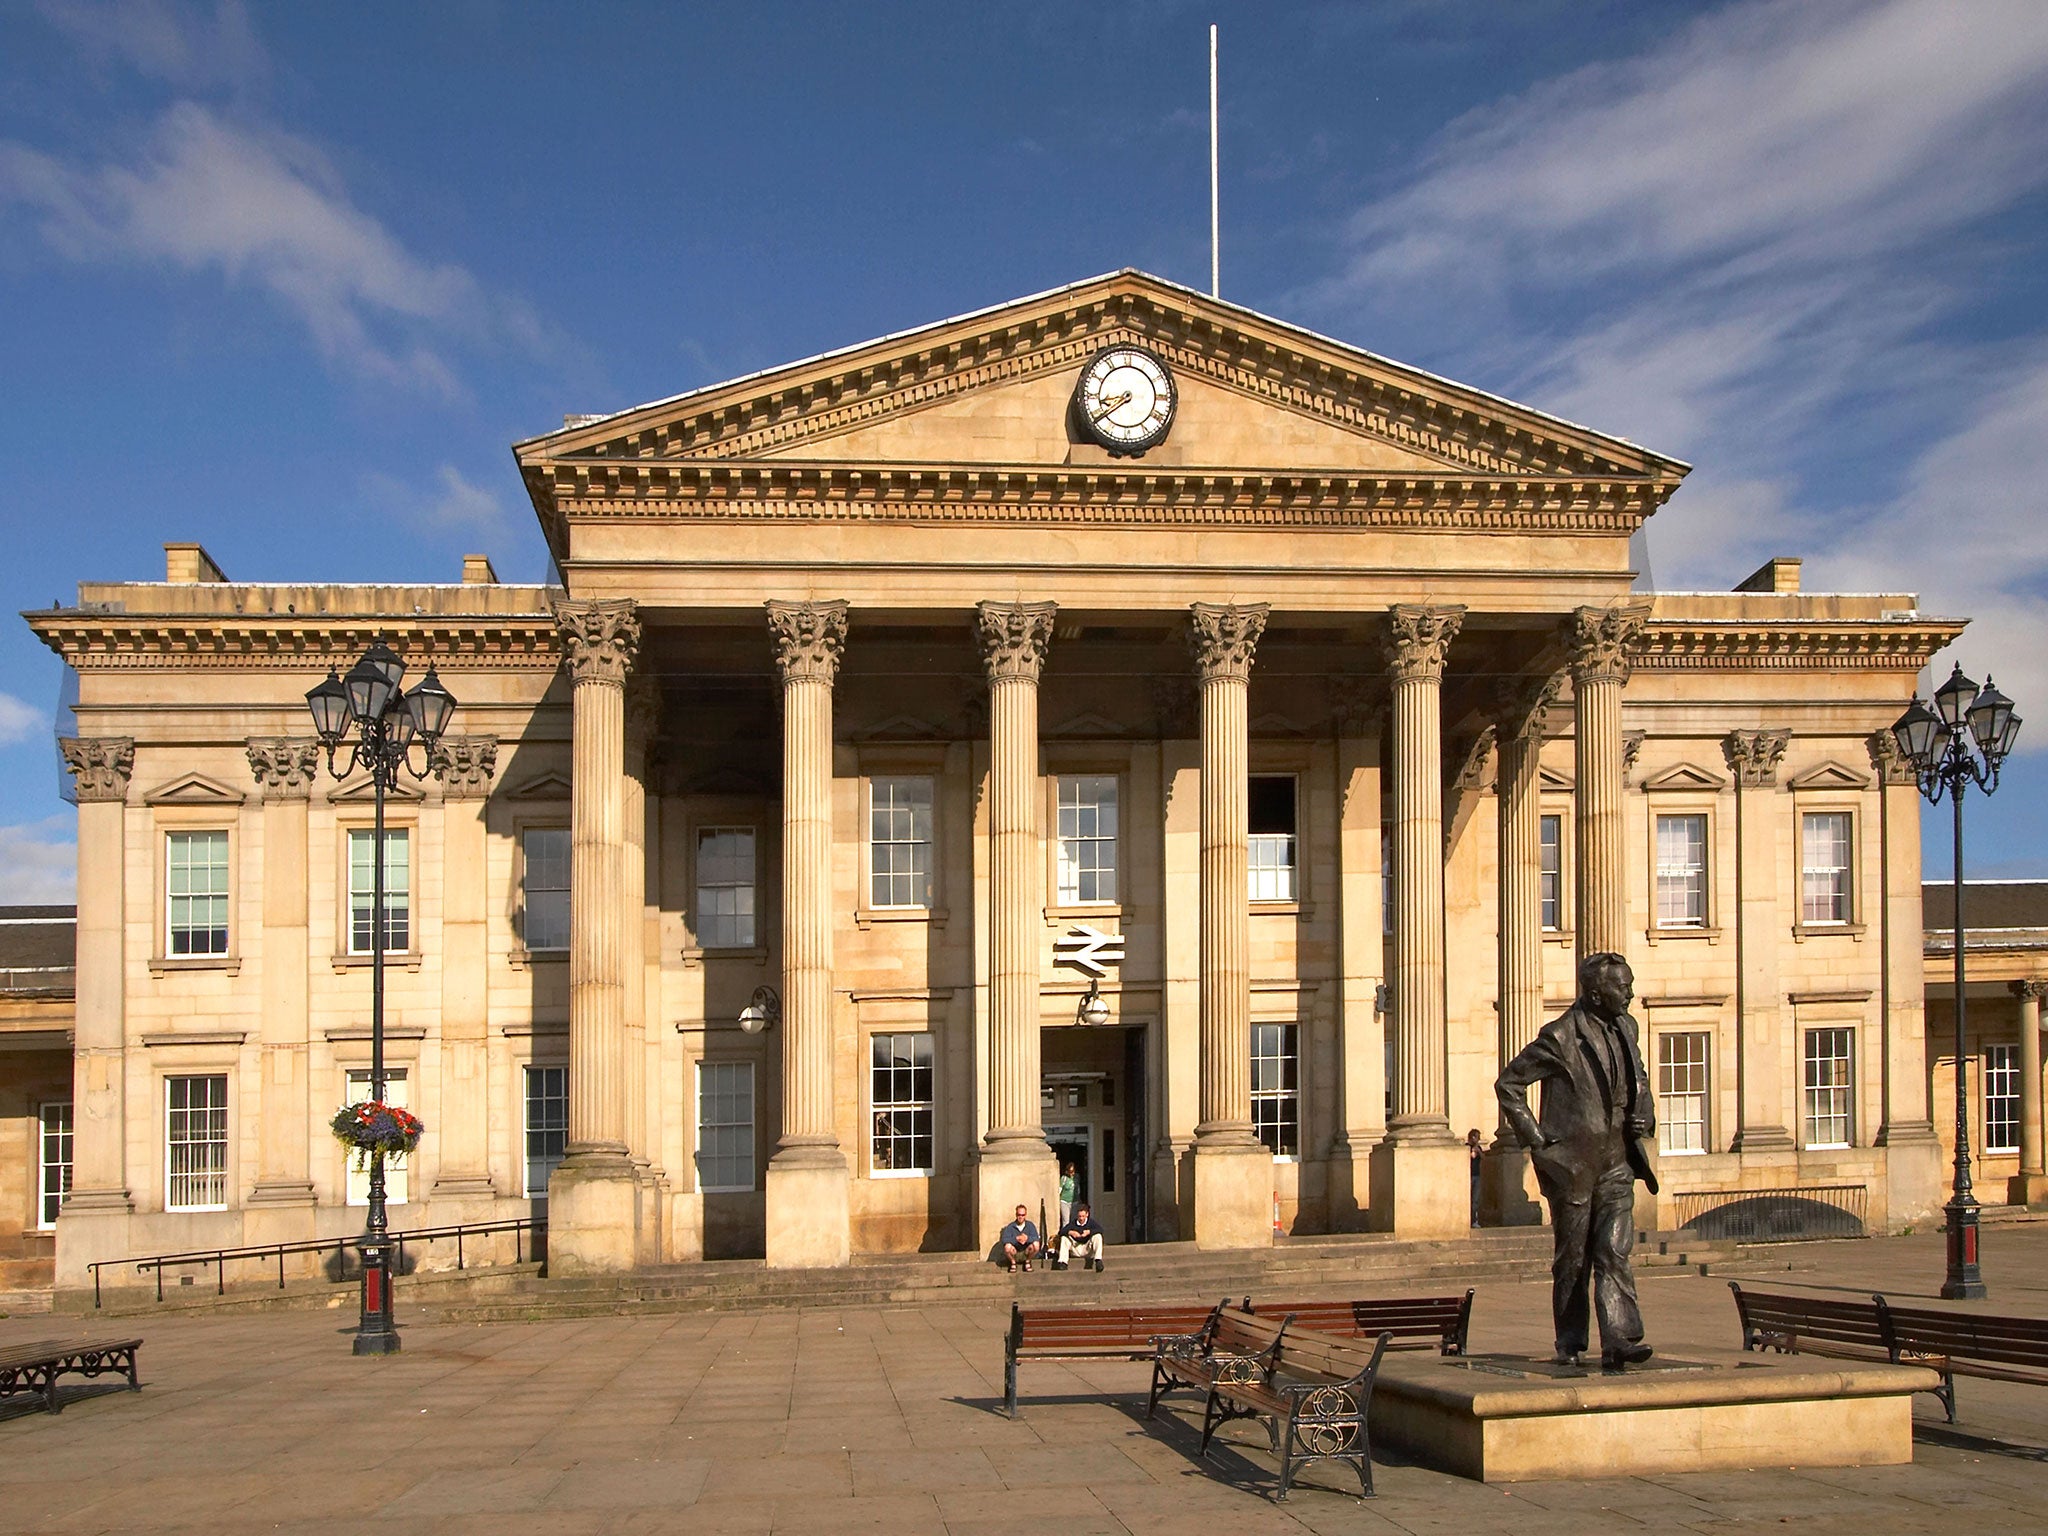 Huddersfield station – with a statue of local hero Harold Wilson in front – came fifth, with judges praising its ‘magnificent classical portico’